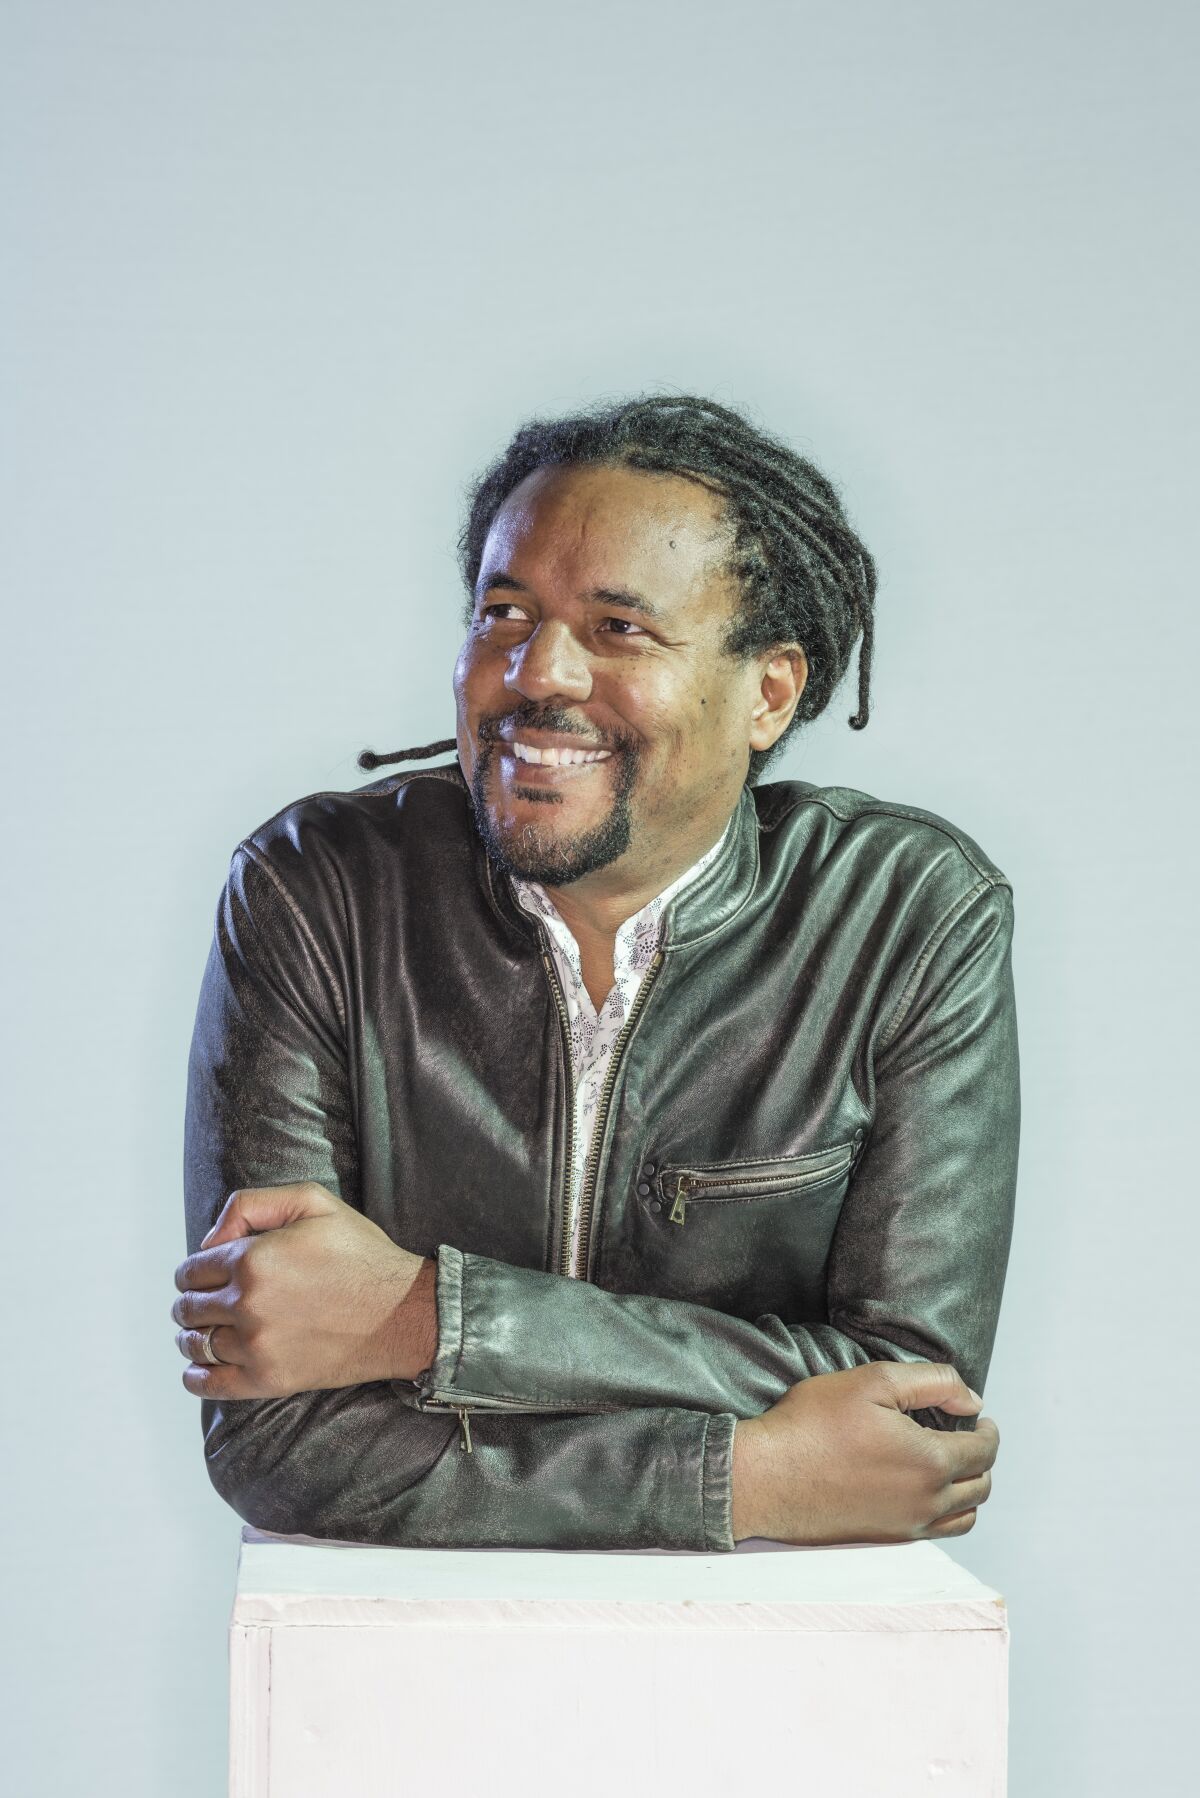 Author Colson Whitehead, wearing a dark jacket and dreadlocks, leans on a white pedestal.